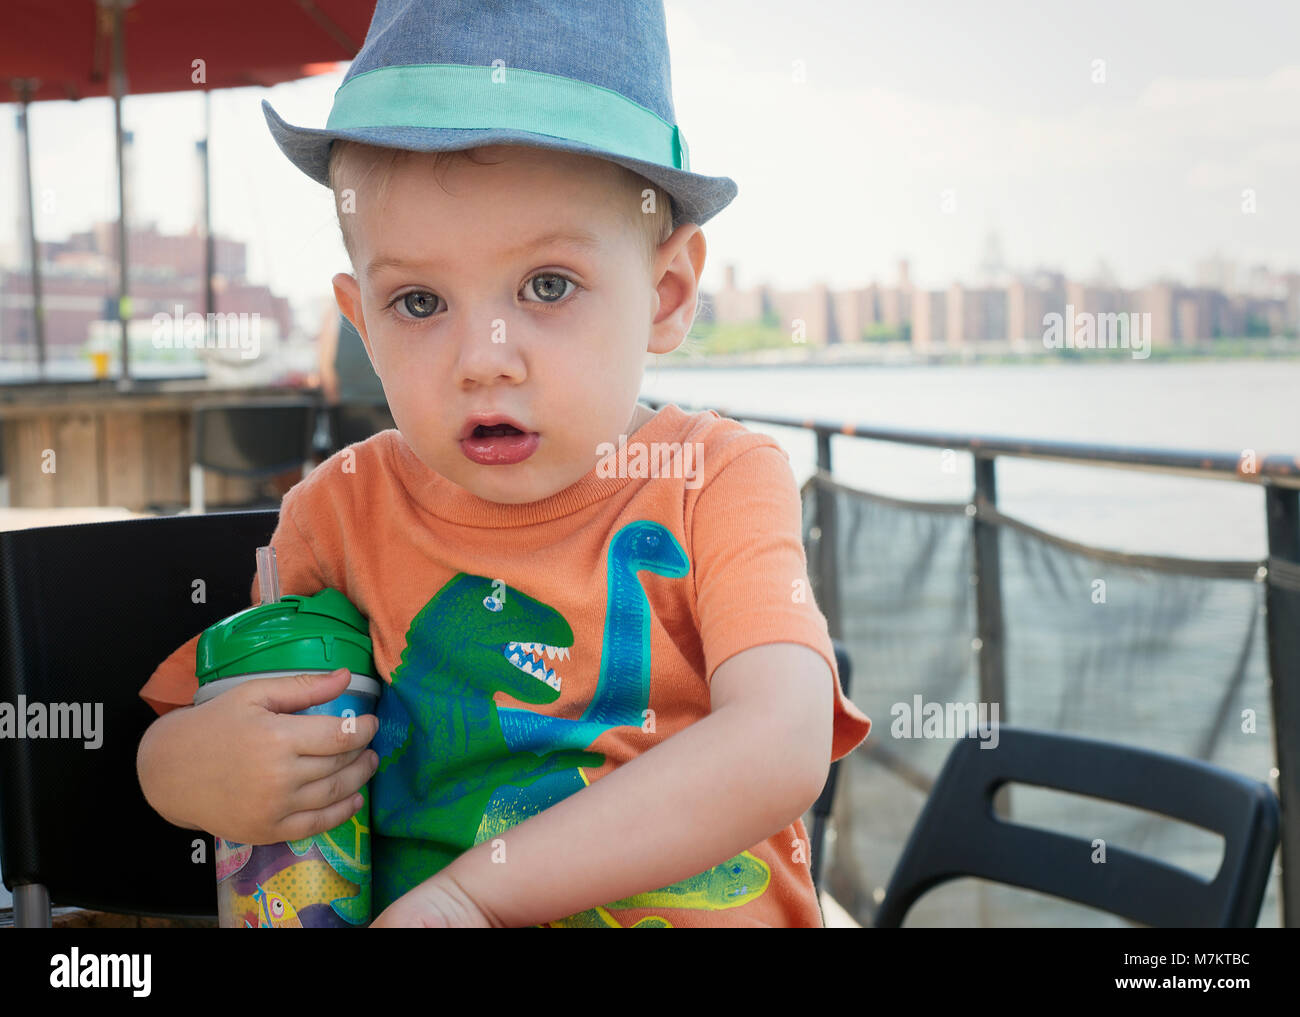 A baby hanging out at an outdoor restaurant wearing a dinosaur shirt. Stock Photo